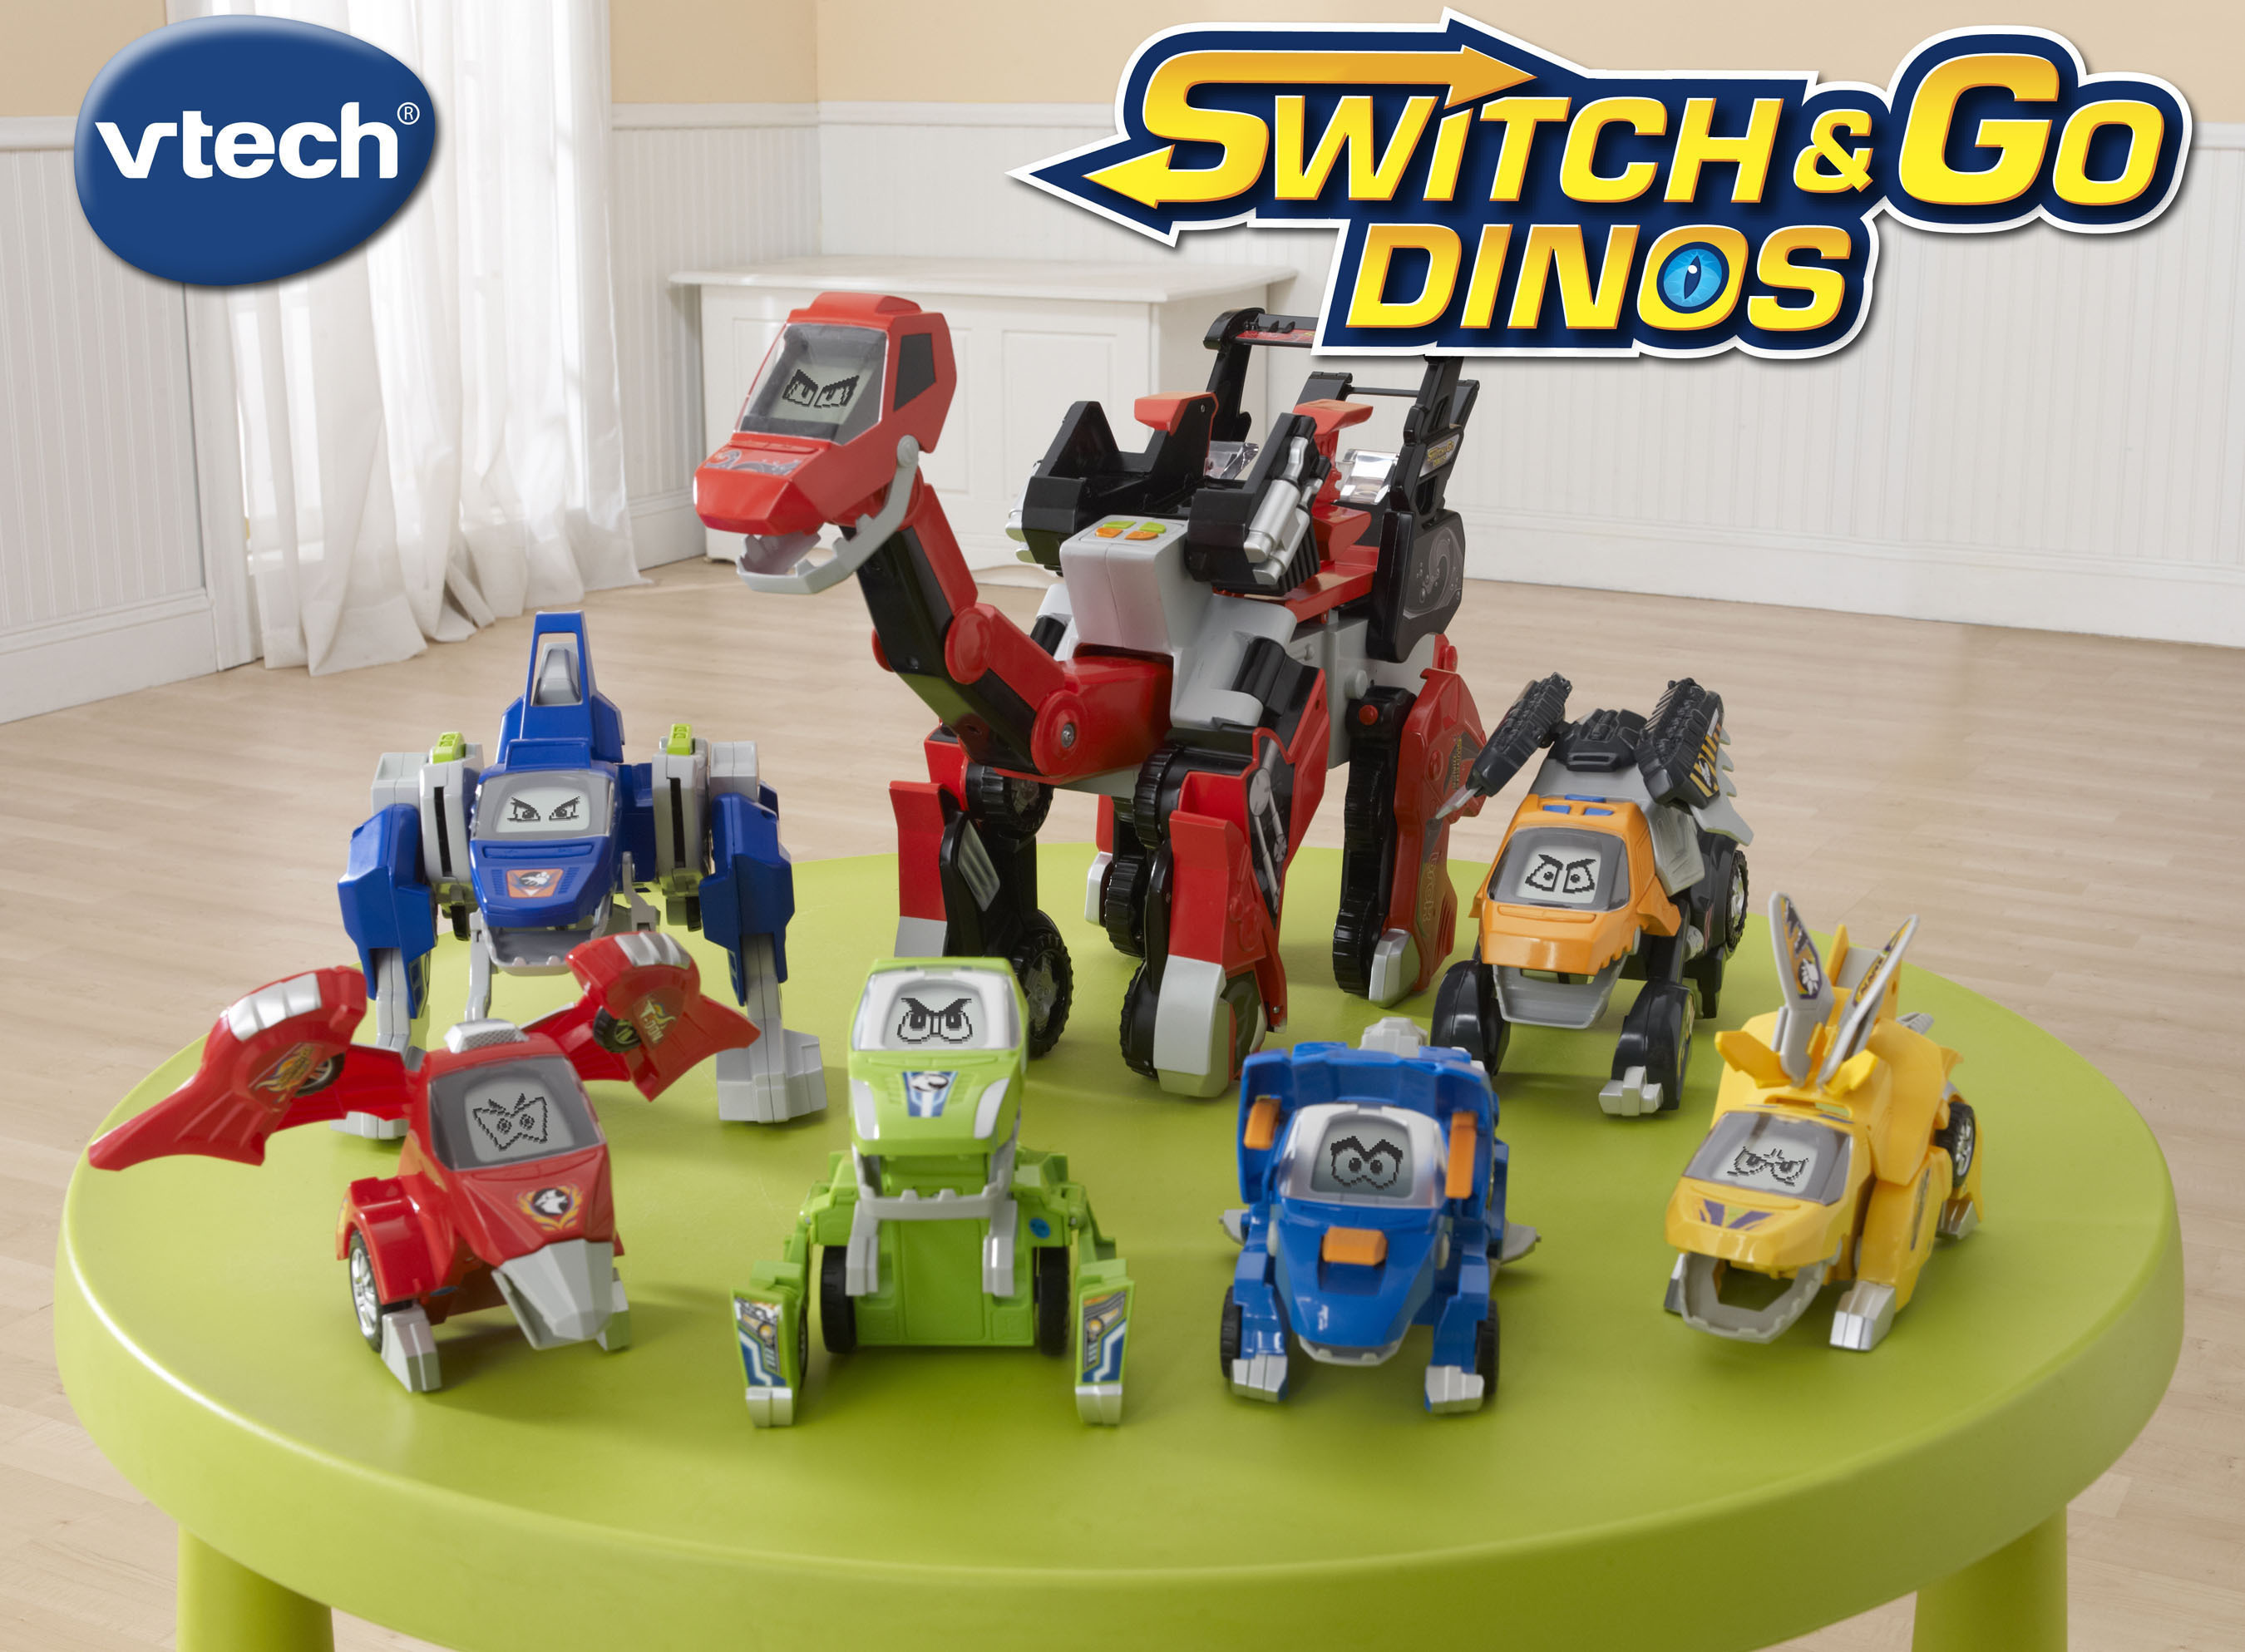 VTech Introduces Latest Toy Innovations, Branches Out with New Switch & Go  Dinos